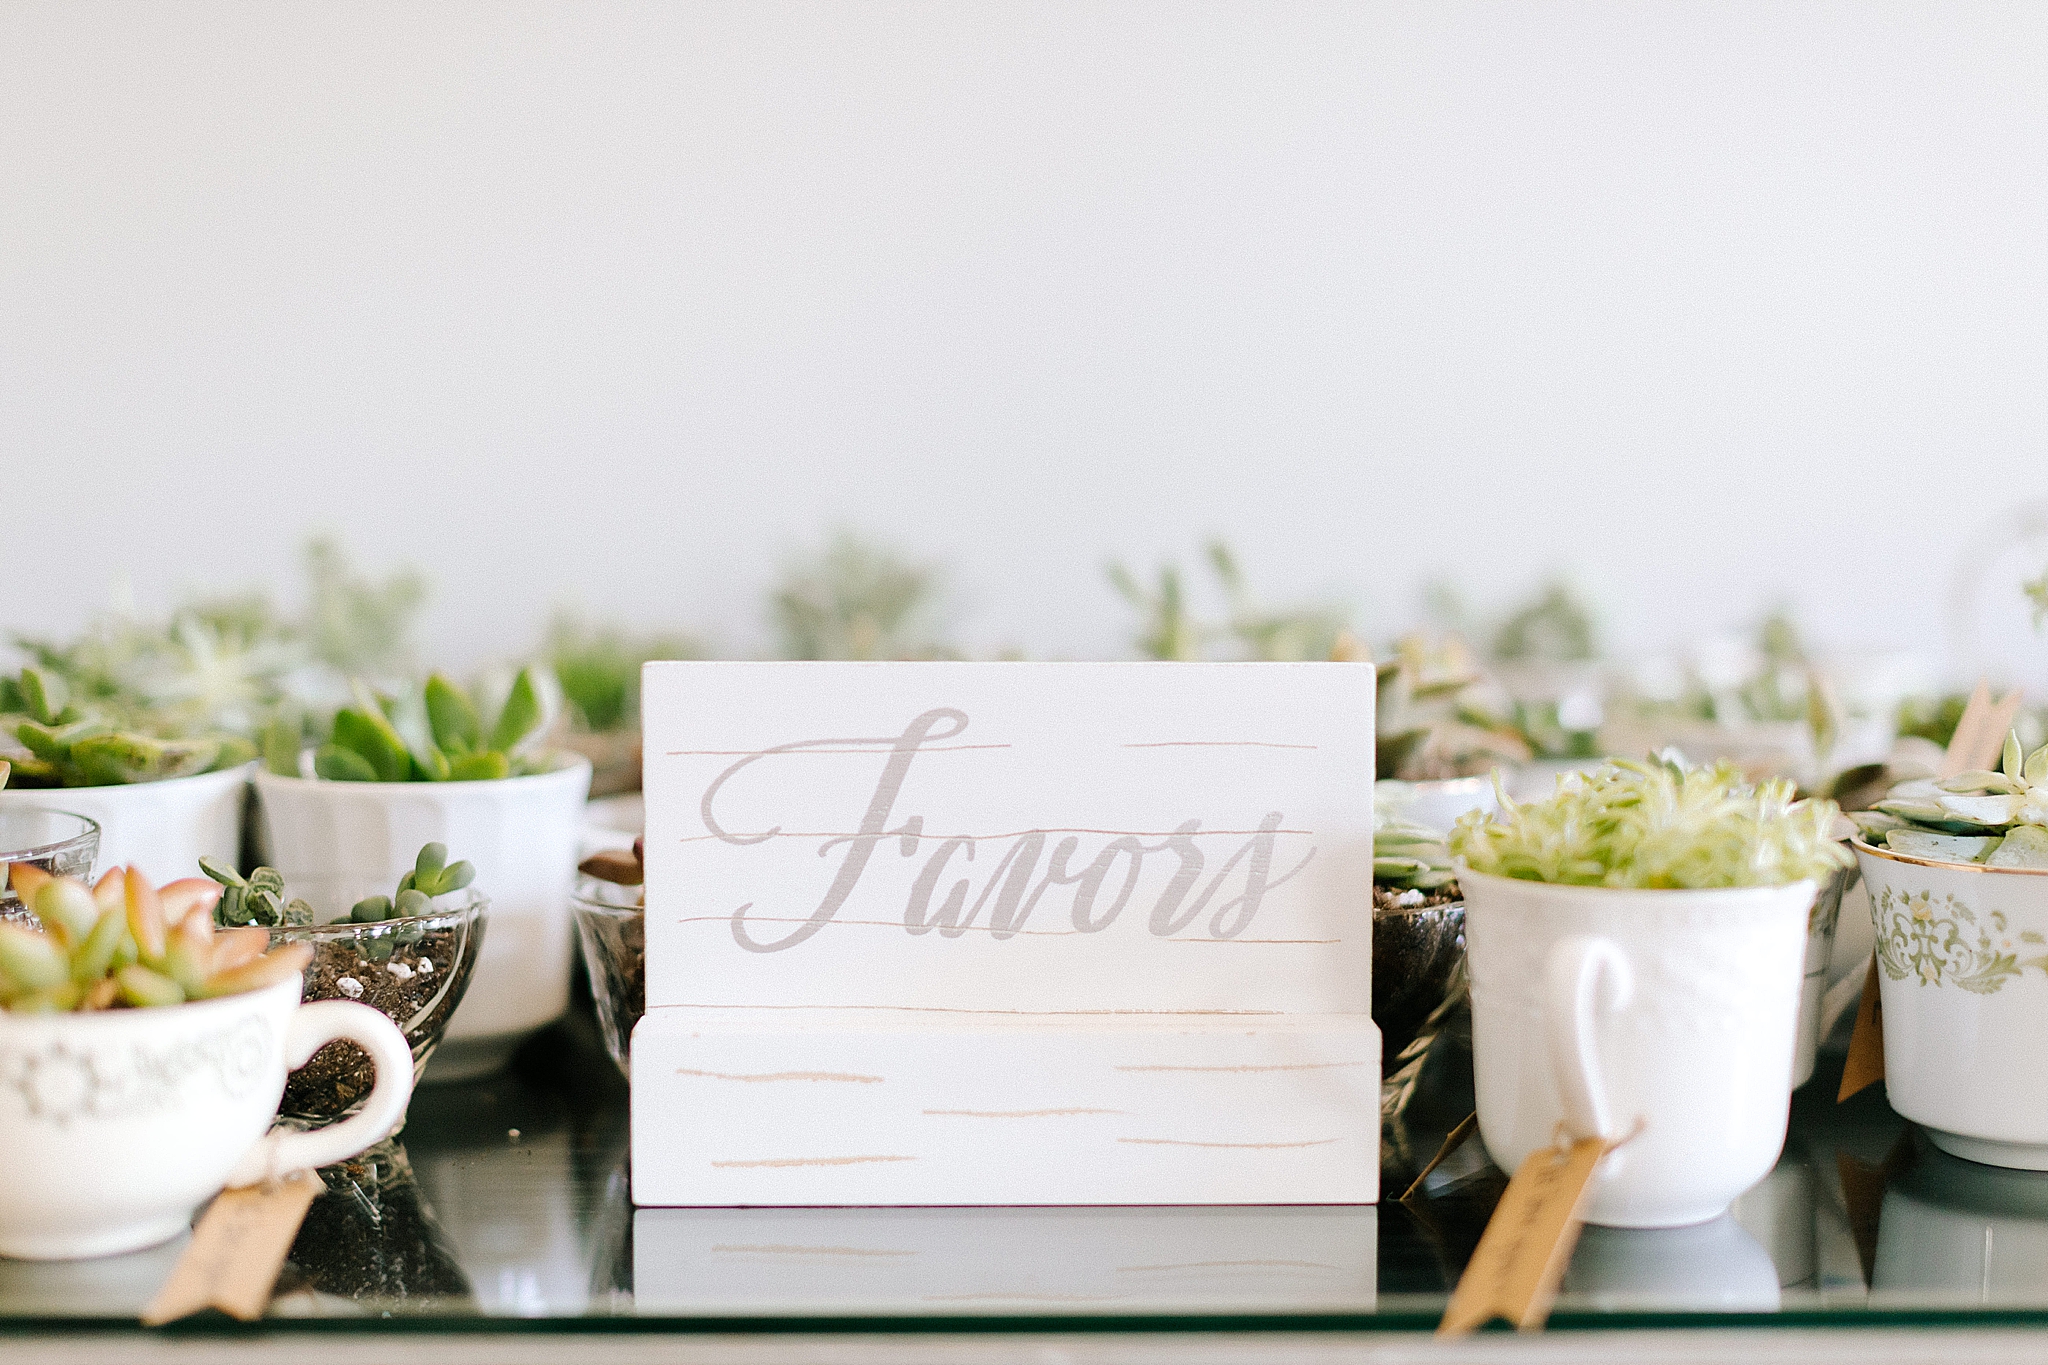 favors sign with succulents for Southern Charm Events wedding